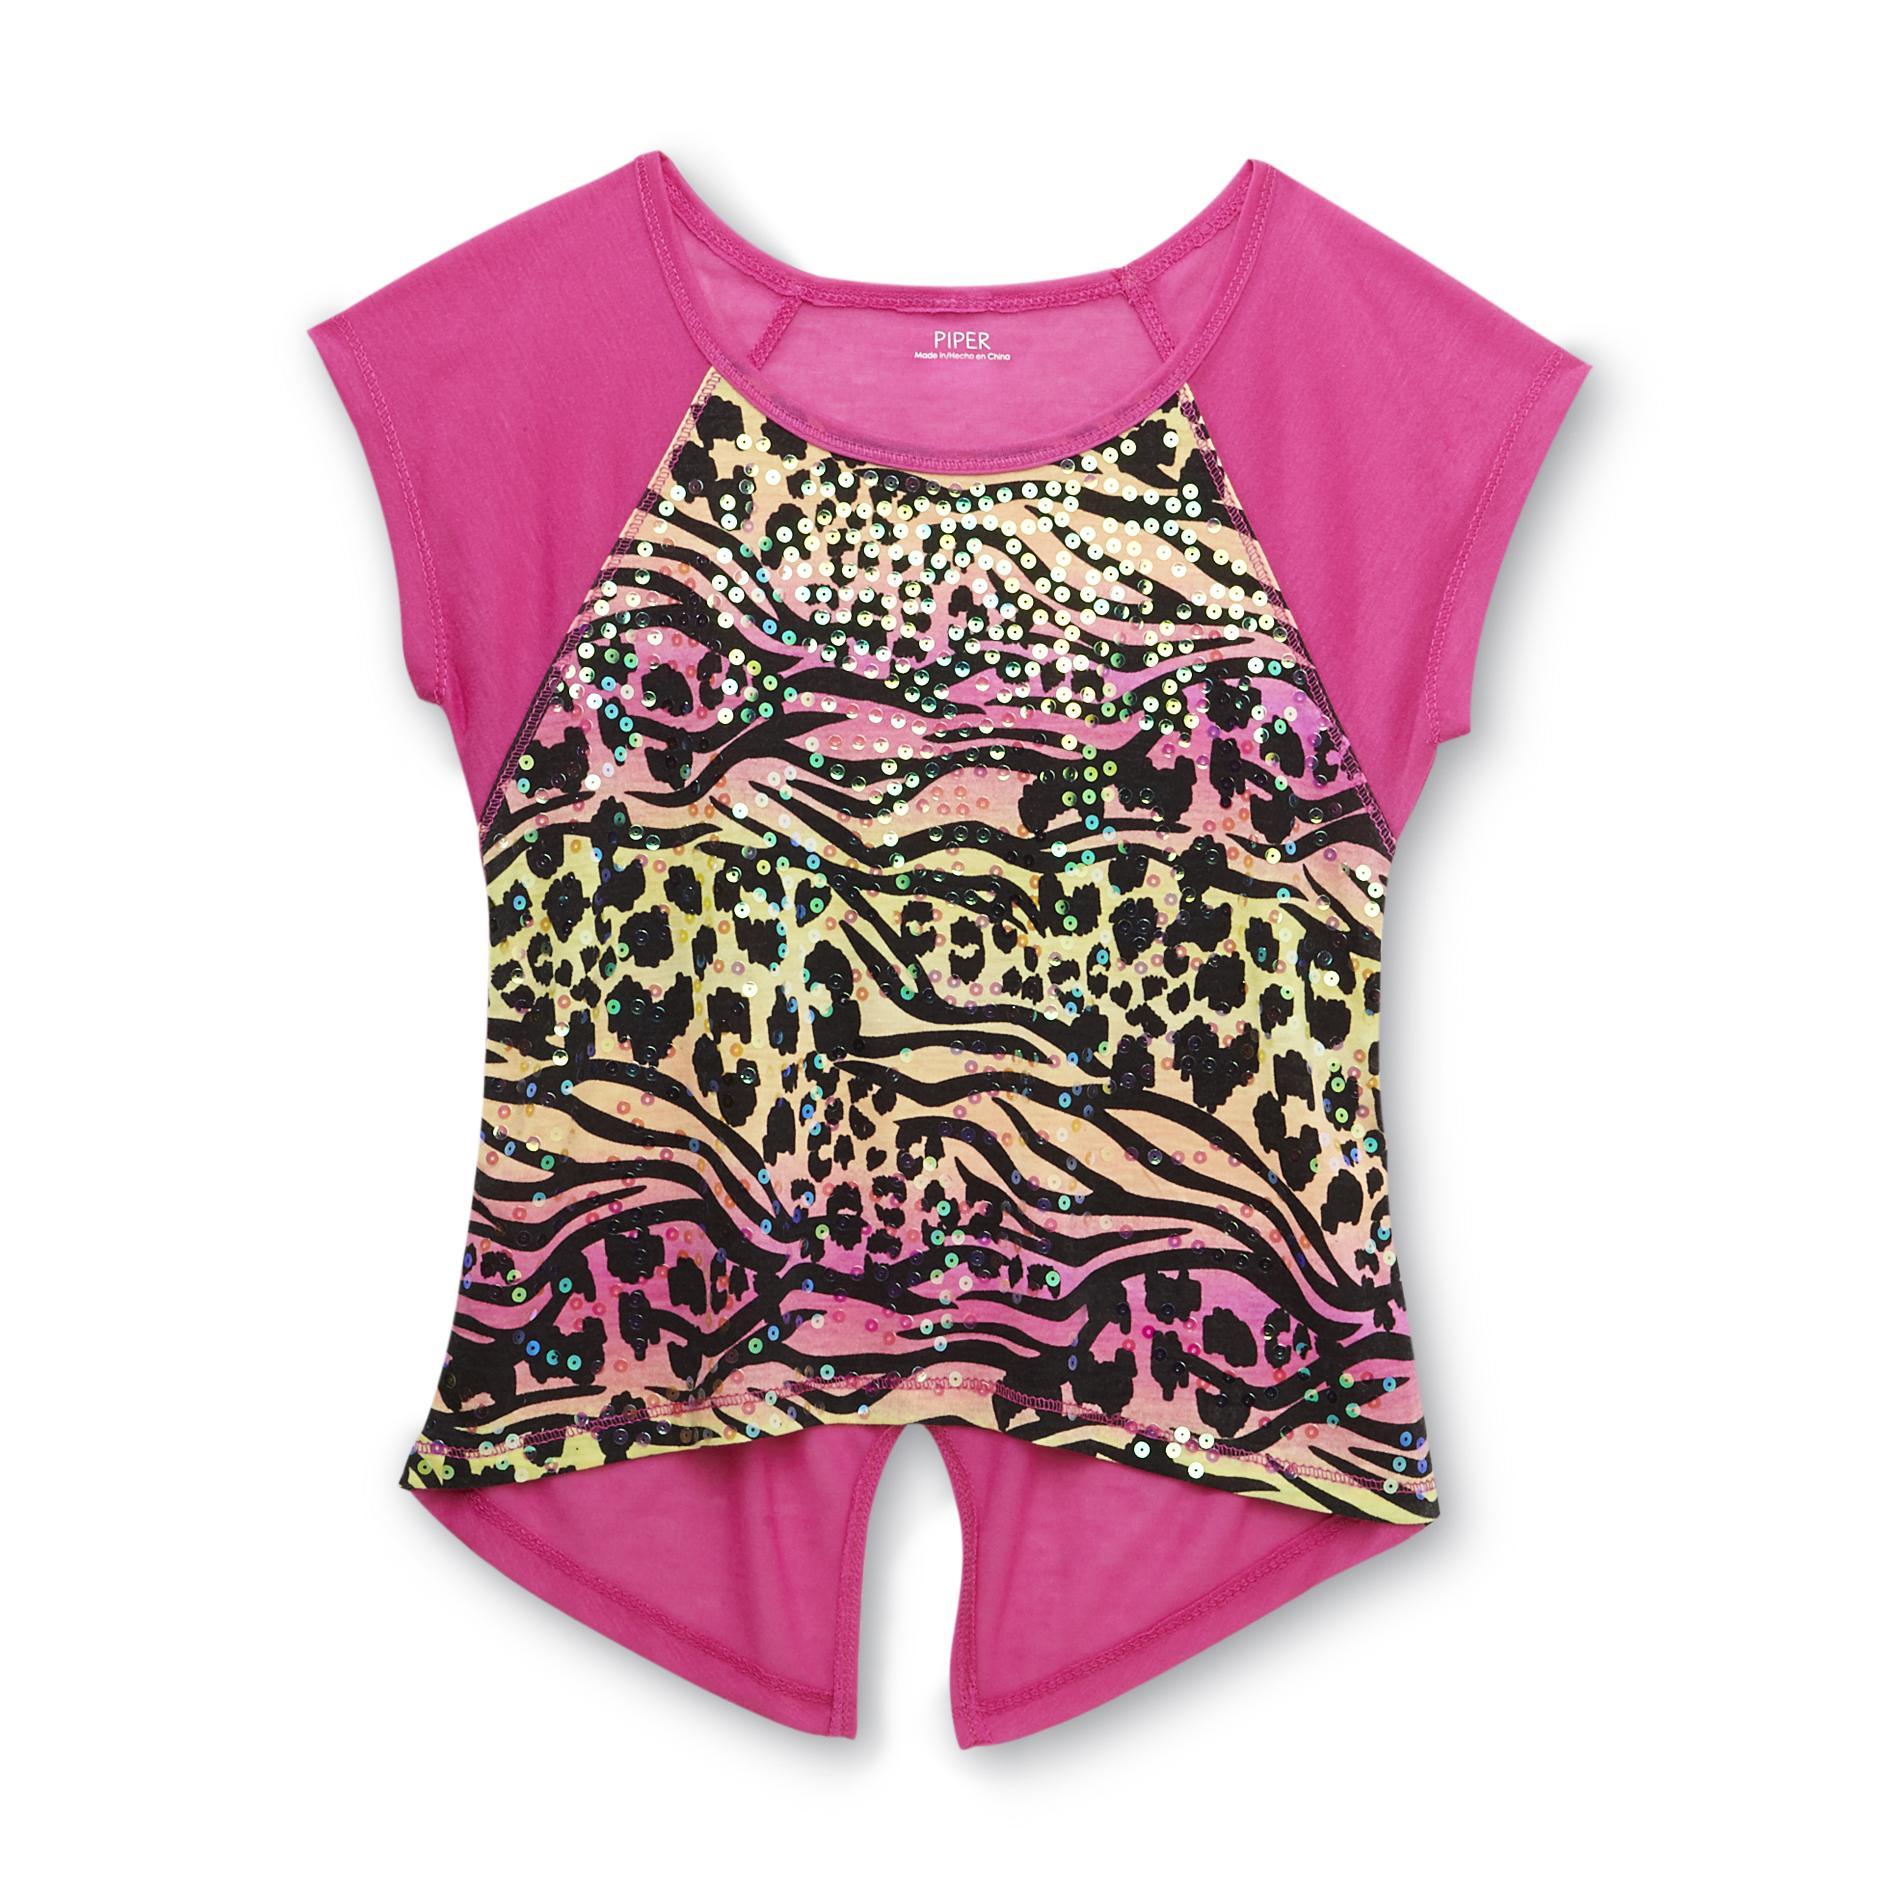 Piper Girl's Sequin Embellished T-Shirt - Animal Print